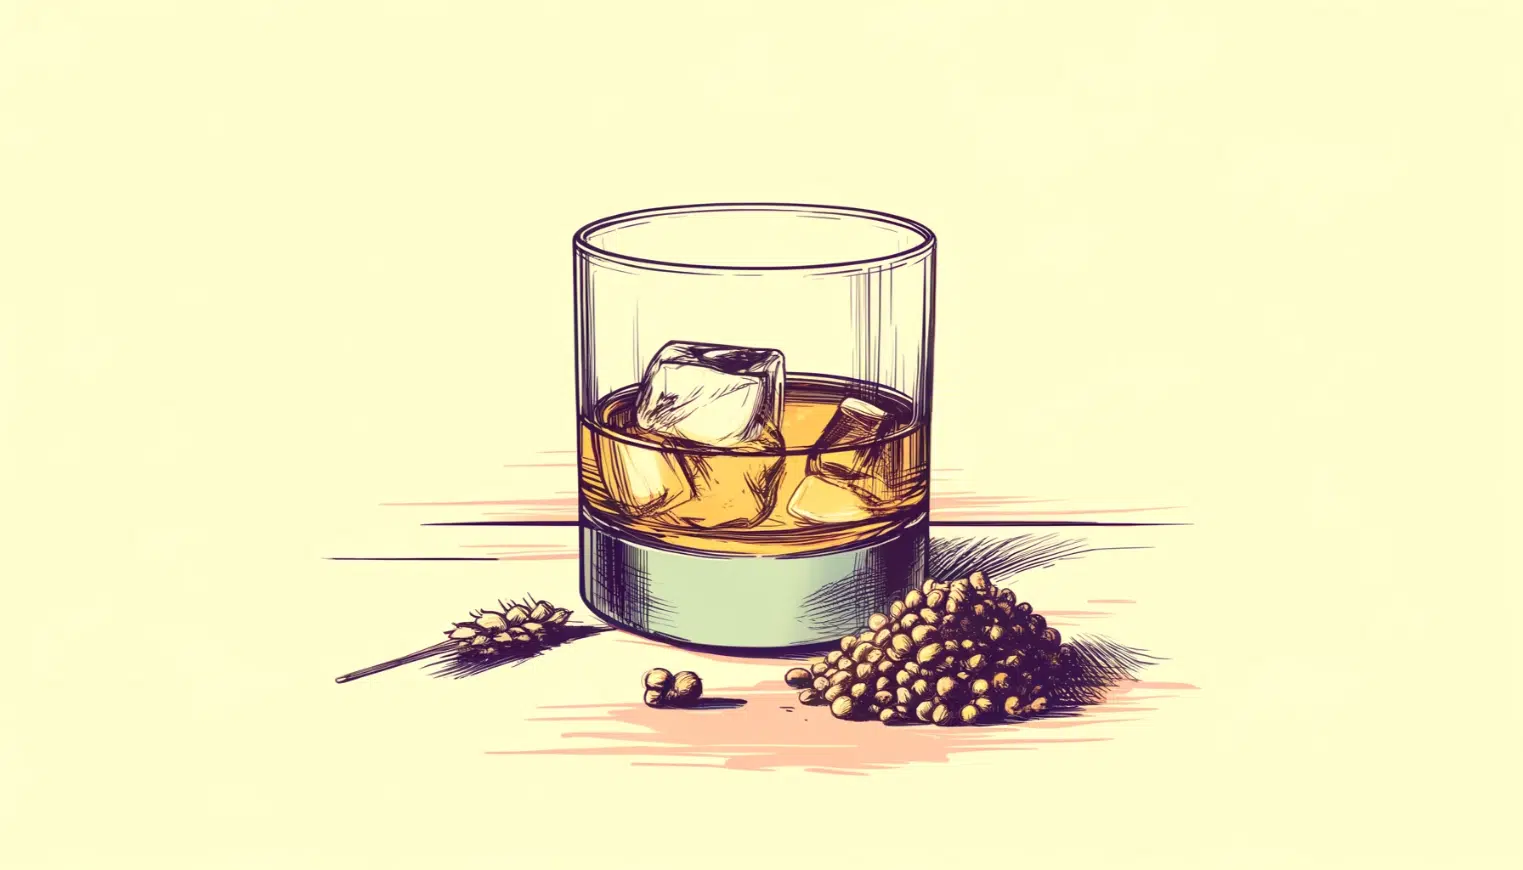 Whiskey glass with ice, barley, and malt illustration.